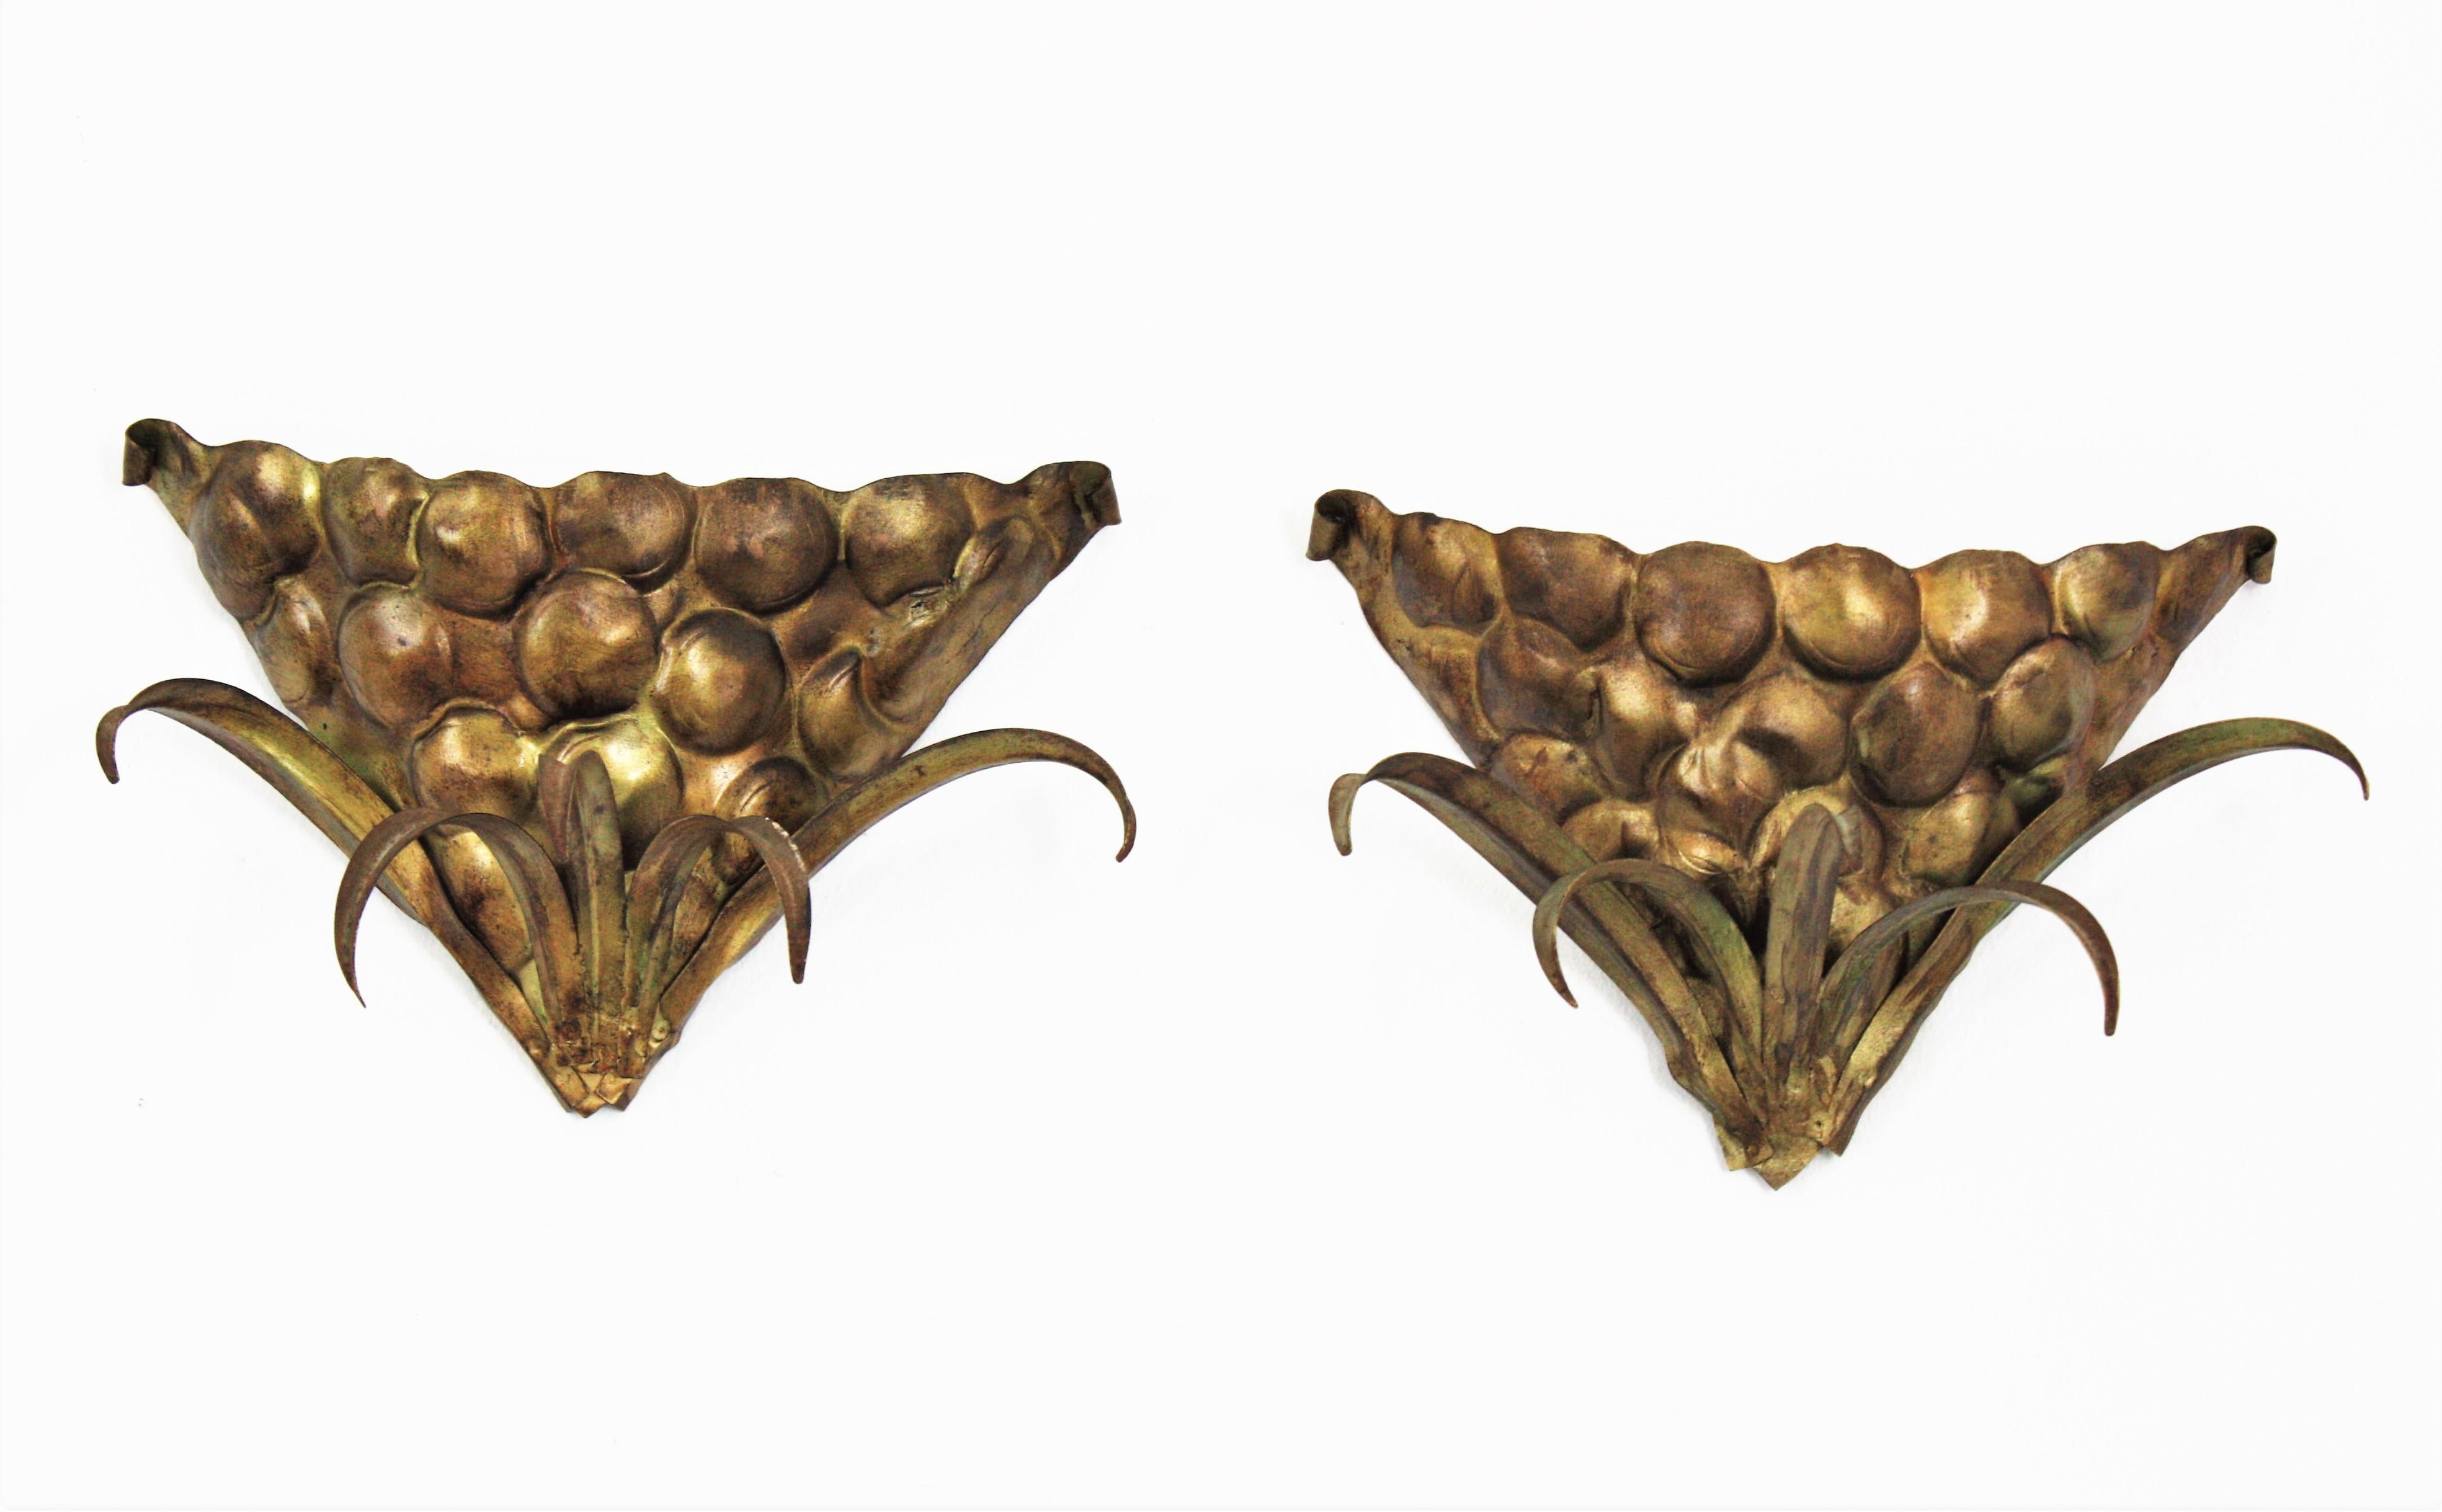 Pair of Hollywood Regency gilt metal grapes and leaves wall sconces, Spain, 1950s
These wall sconces feature a gilt metal shade in bunch of grapes shape accented by leaves at the bottom part.
Nice aged patina.
They provide a charming mood